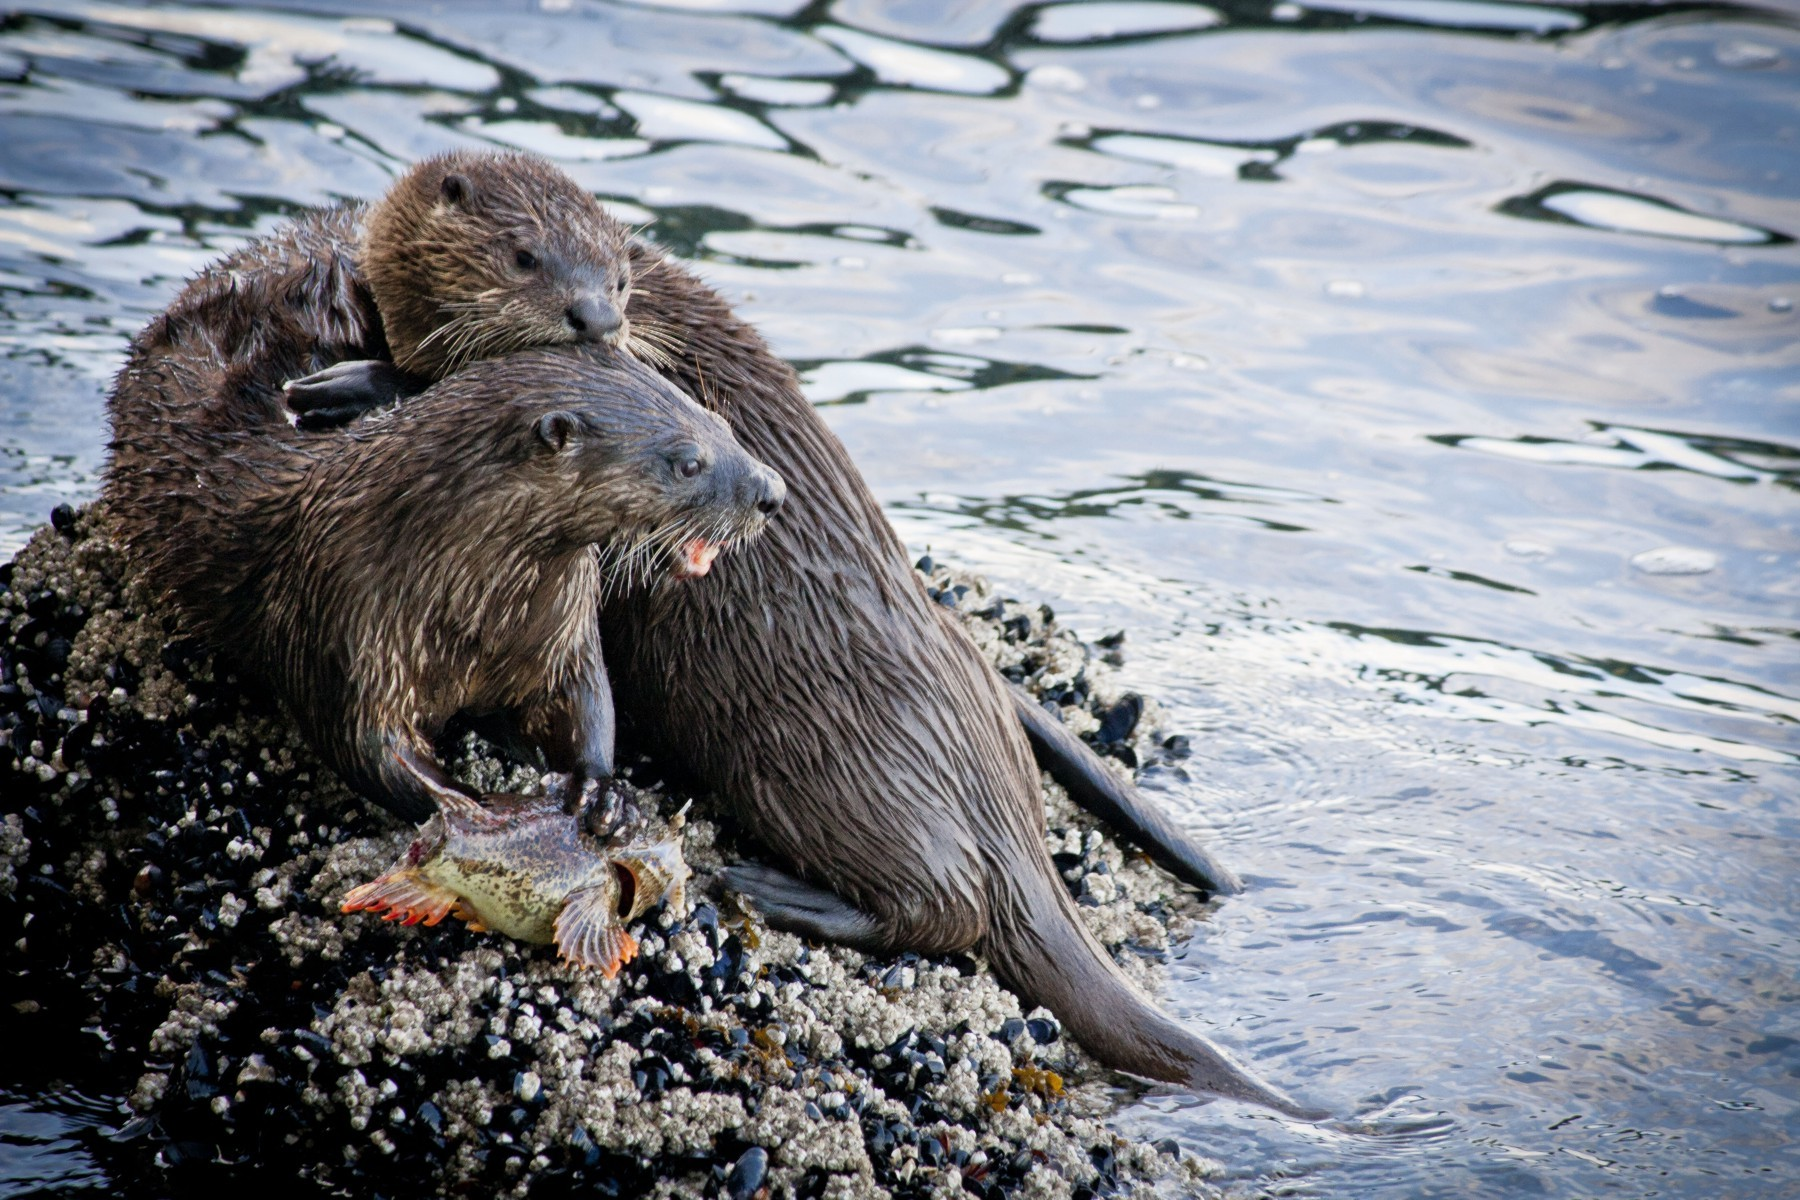 A rock surrounded by rippling water. On the rock, a North American River Otter is holding a fish down with one paw while facing right with its mouth open; a second otter is climbing on top of it, and holding its left ear in its mouth